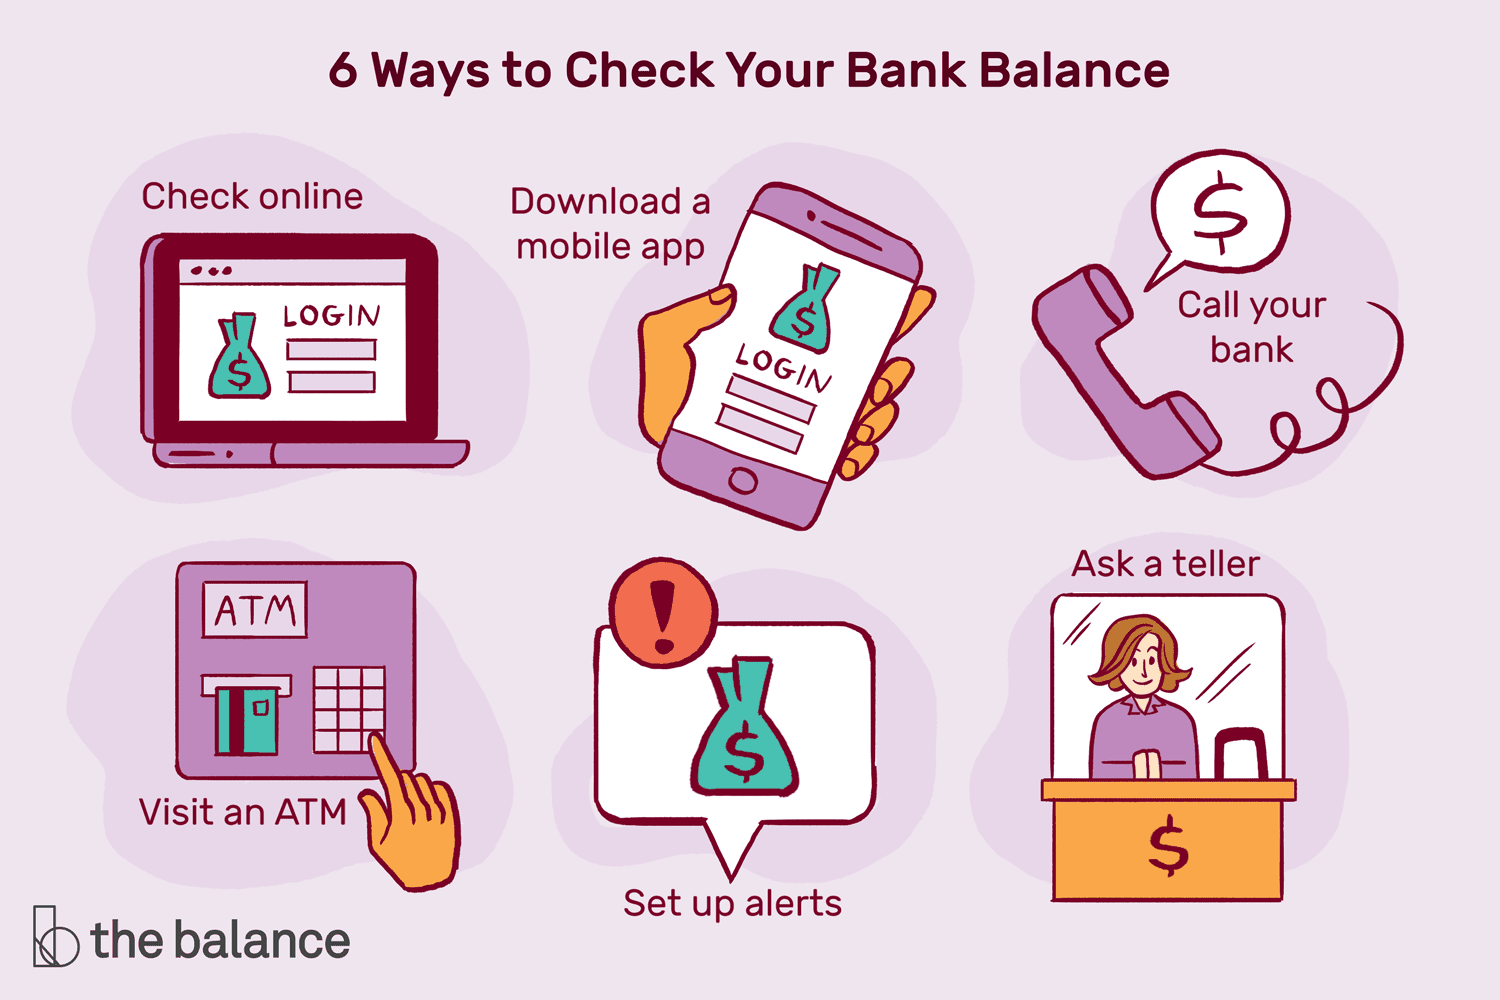 Image shows images of a computer, phone, atm, phone, an alert sign, and a bank teller. Text reads: 6 Ways to Check Your Bank Balance. Check online, download a mobile app, call your bank, visit an ATM, set up alerts, and ask a teller.